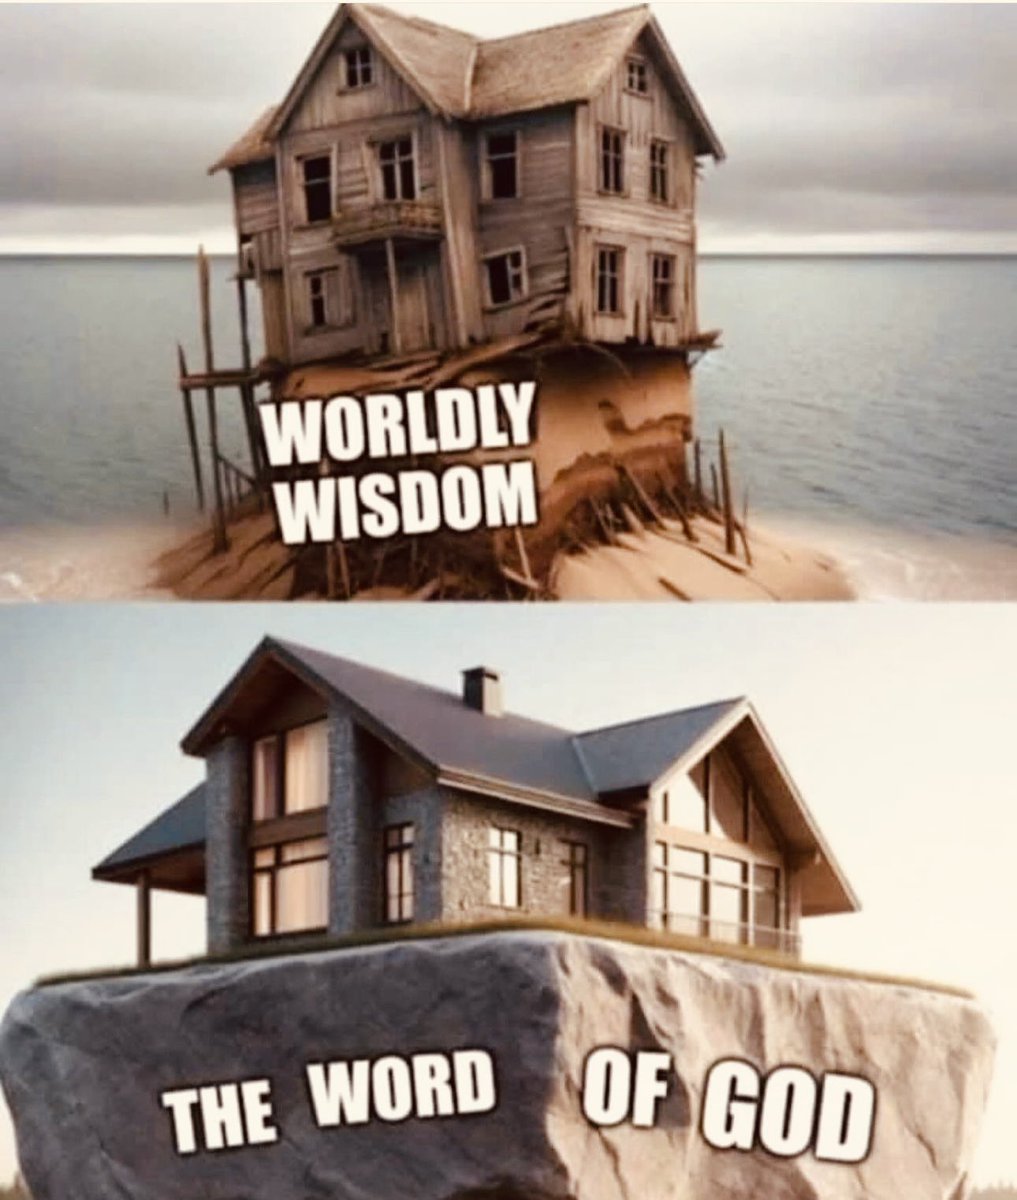 1 Corinthians 3:19.20
“For the wisdom of this world is foolishness with God. For it is written, He taketh the wise in their own craftiness. And again, The Lord knoweth the thoughts of the wise, that they are vain.” 📖🎚️